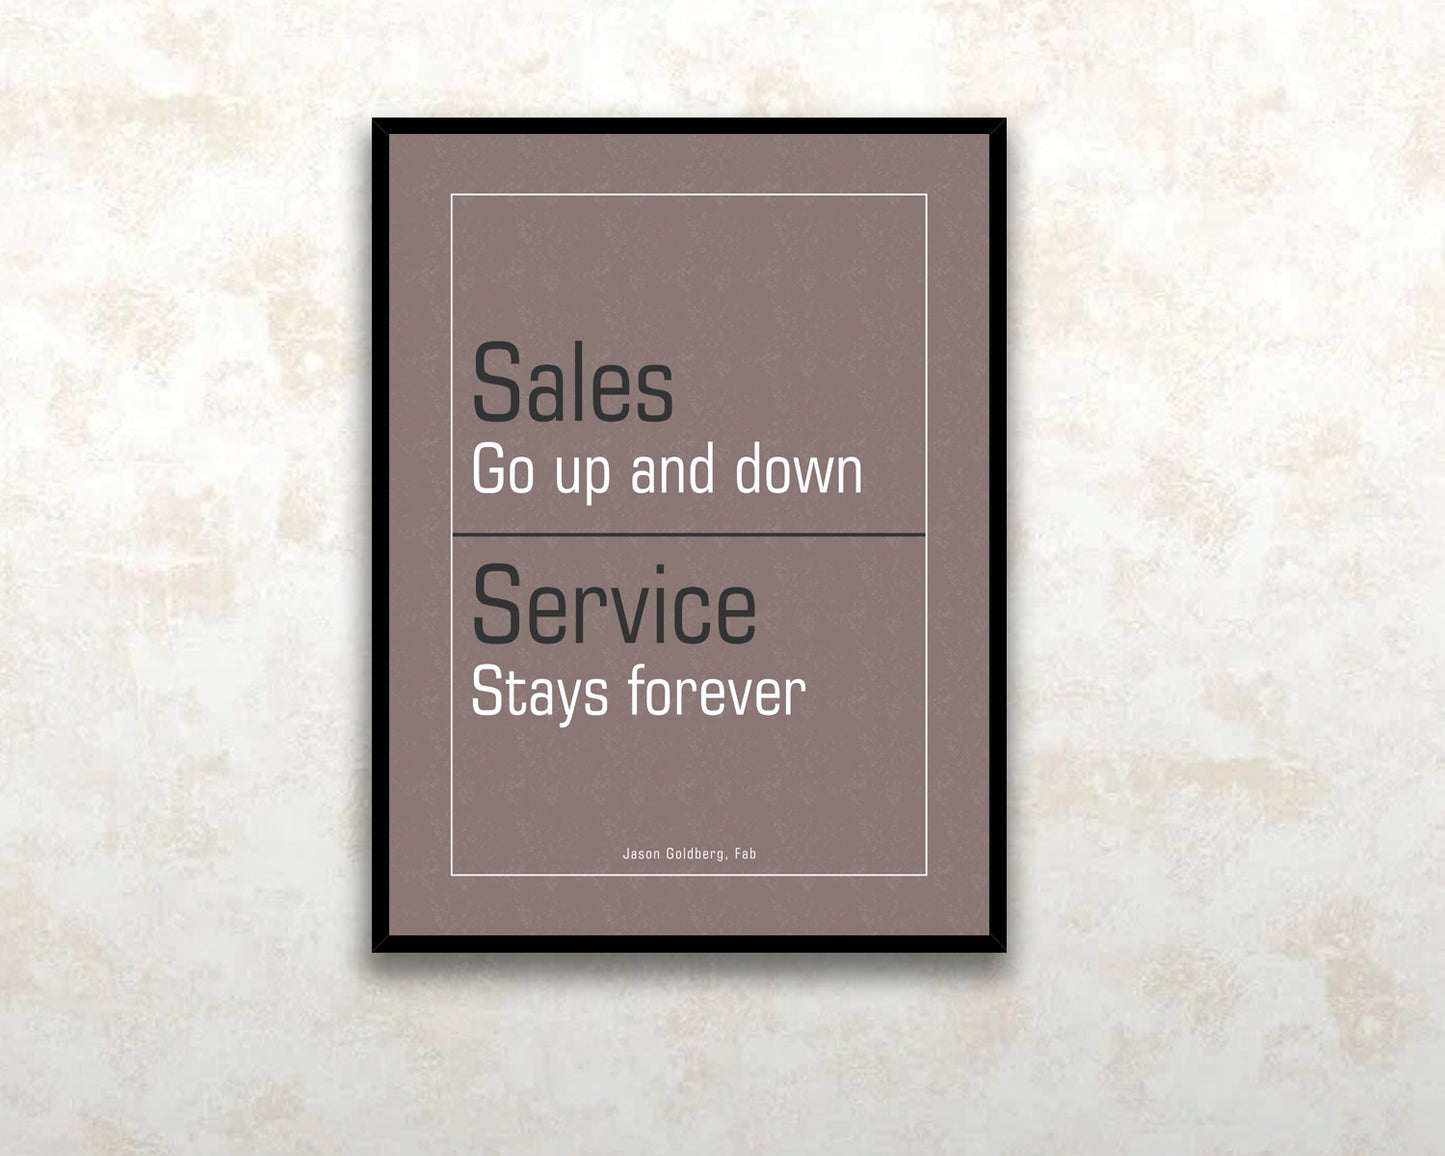 Sales go up and down Canvas Wall Art 